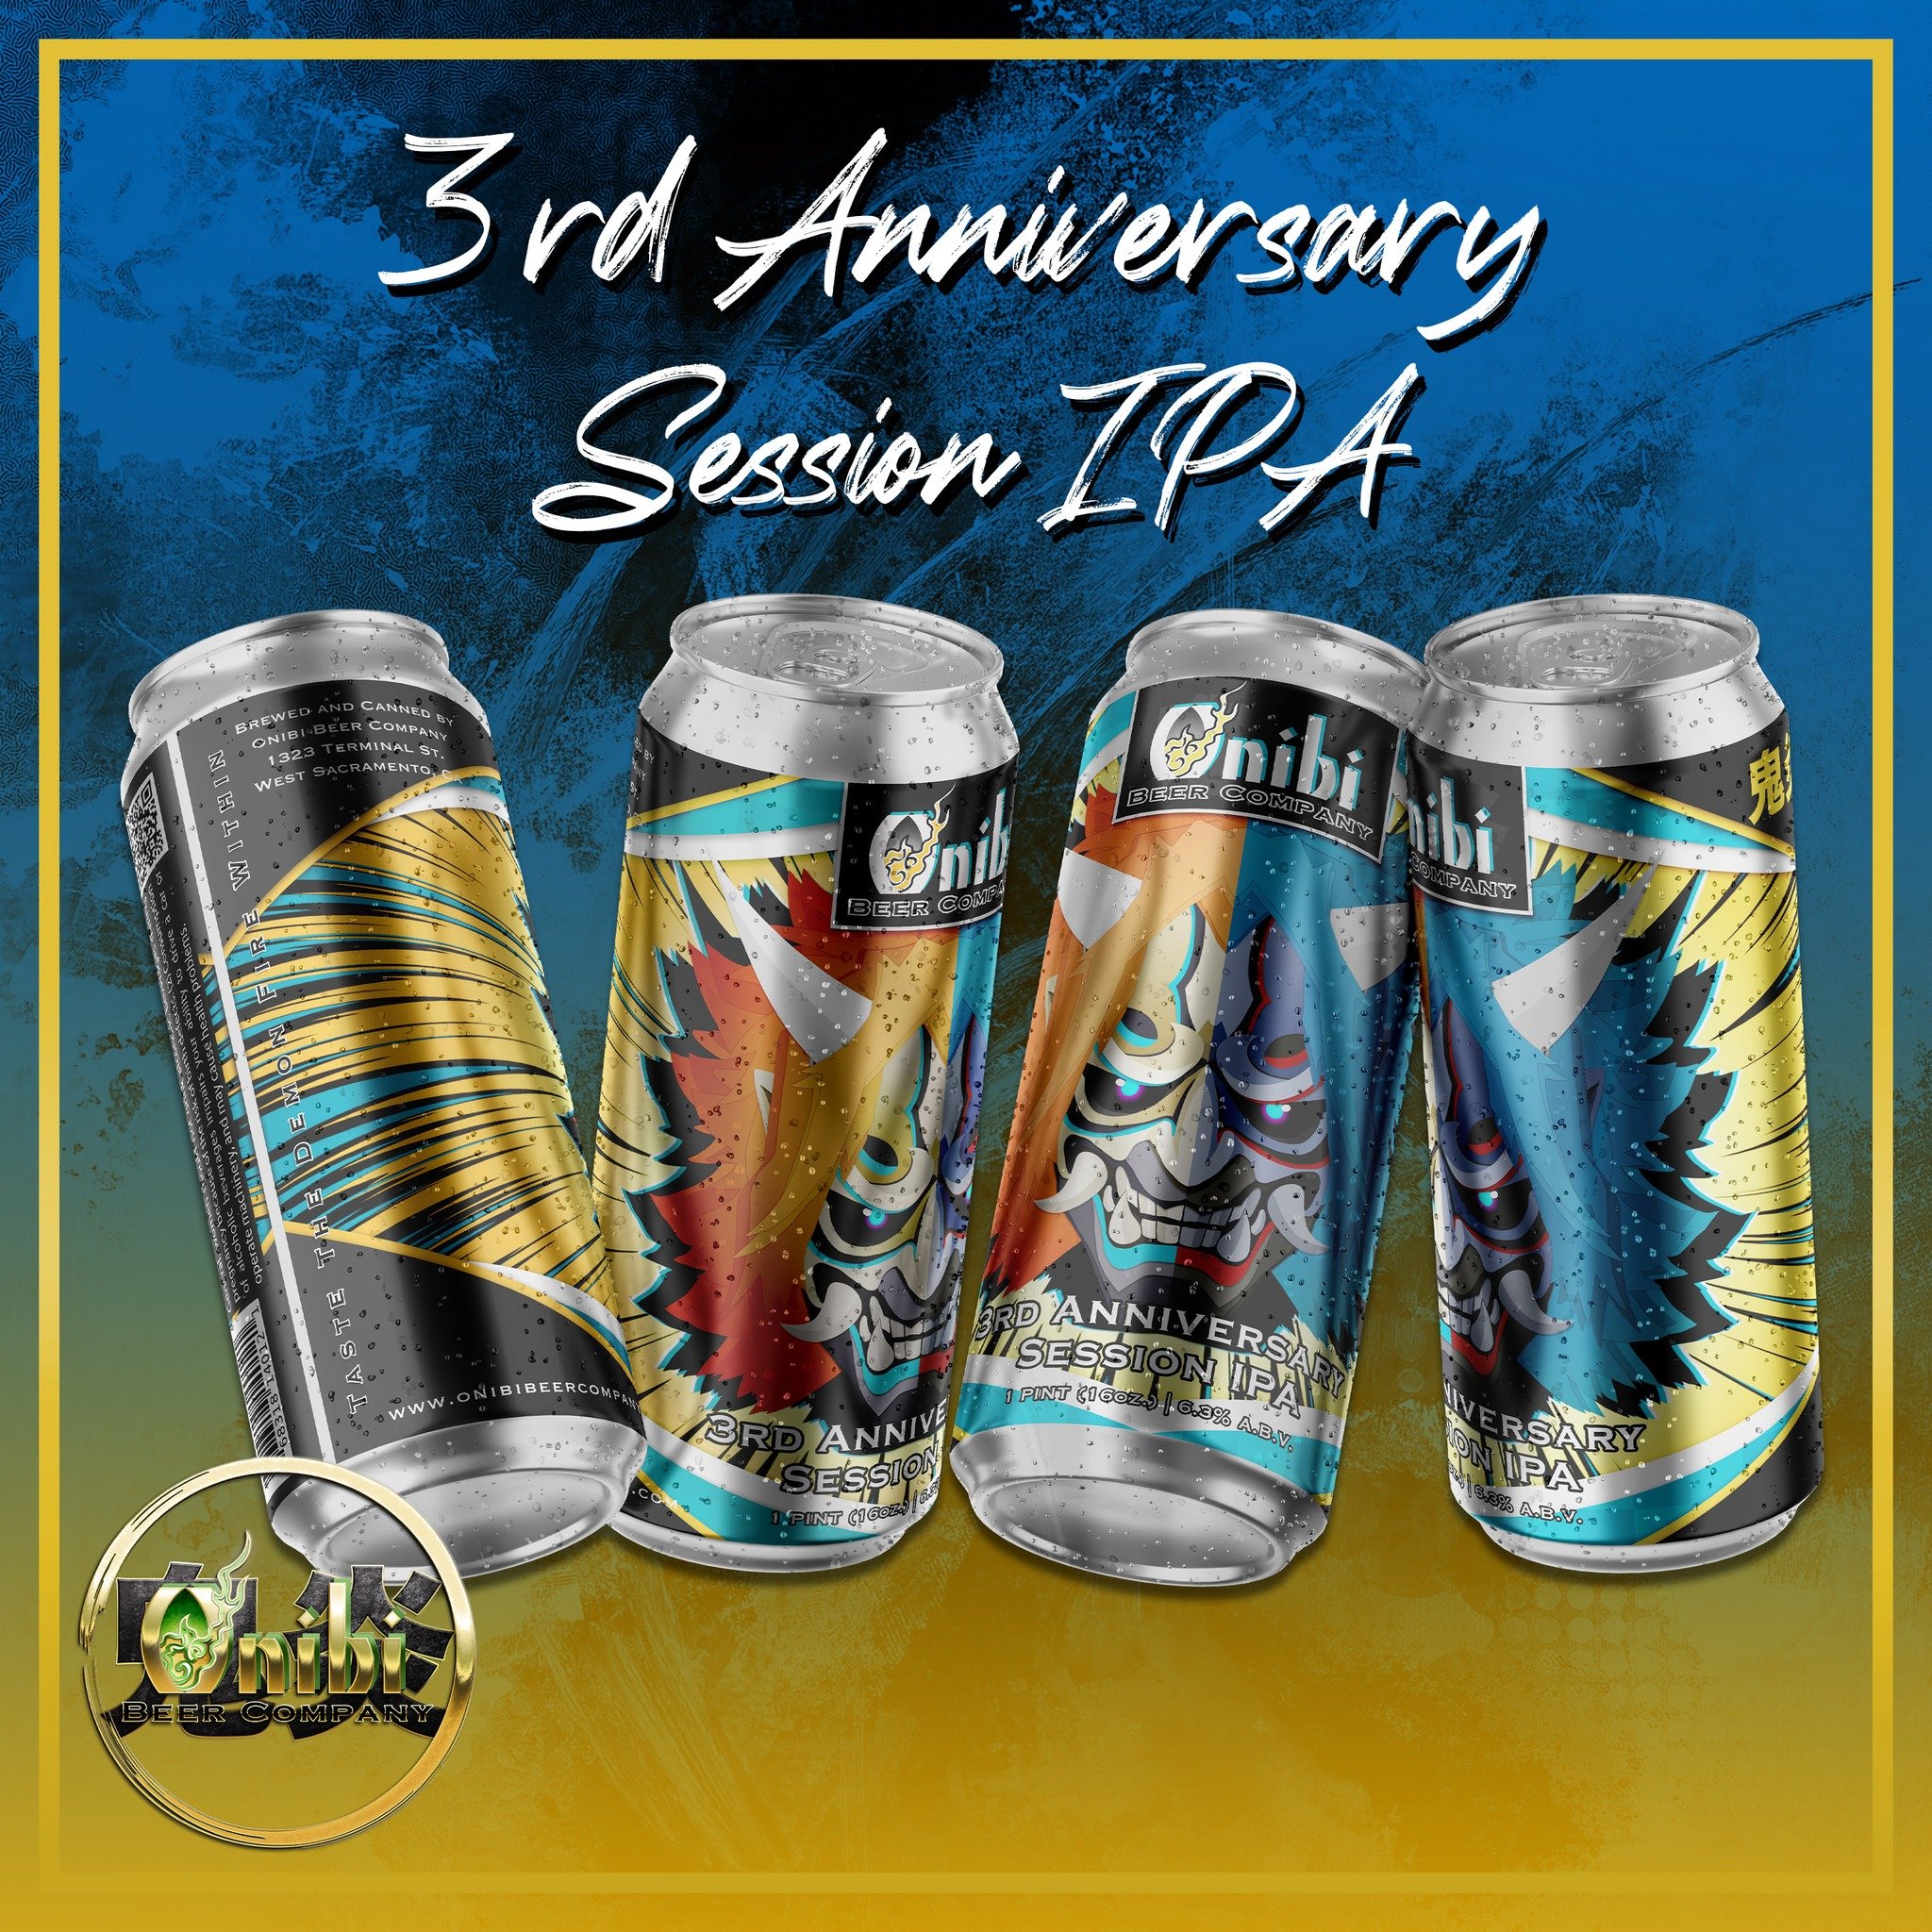 Our 3rd anniversary Session IPA! 
Can release on May 2nd! Limited release, so grab some before they run out! Cheers! 🍻
.
.
.
.
.
.
.
.
#onibibeer #beer #drinklocal #craftbeer #sacramento #microbrew #onibi #westsacramento #ipa #limitedtime #3rdannive